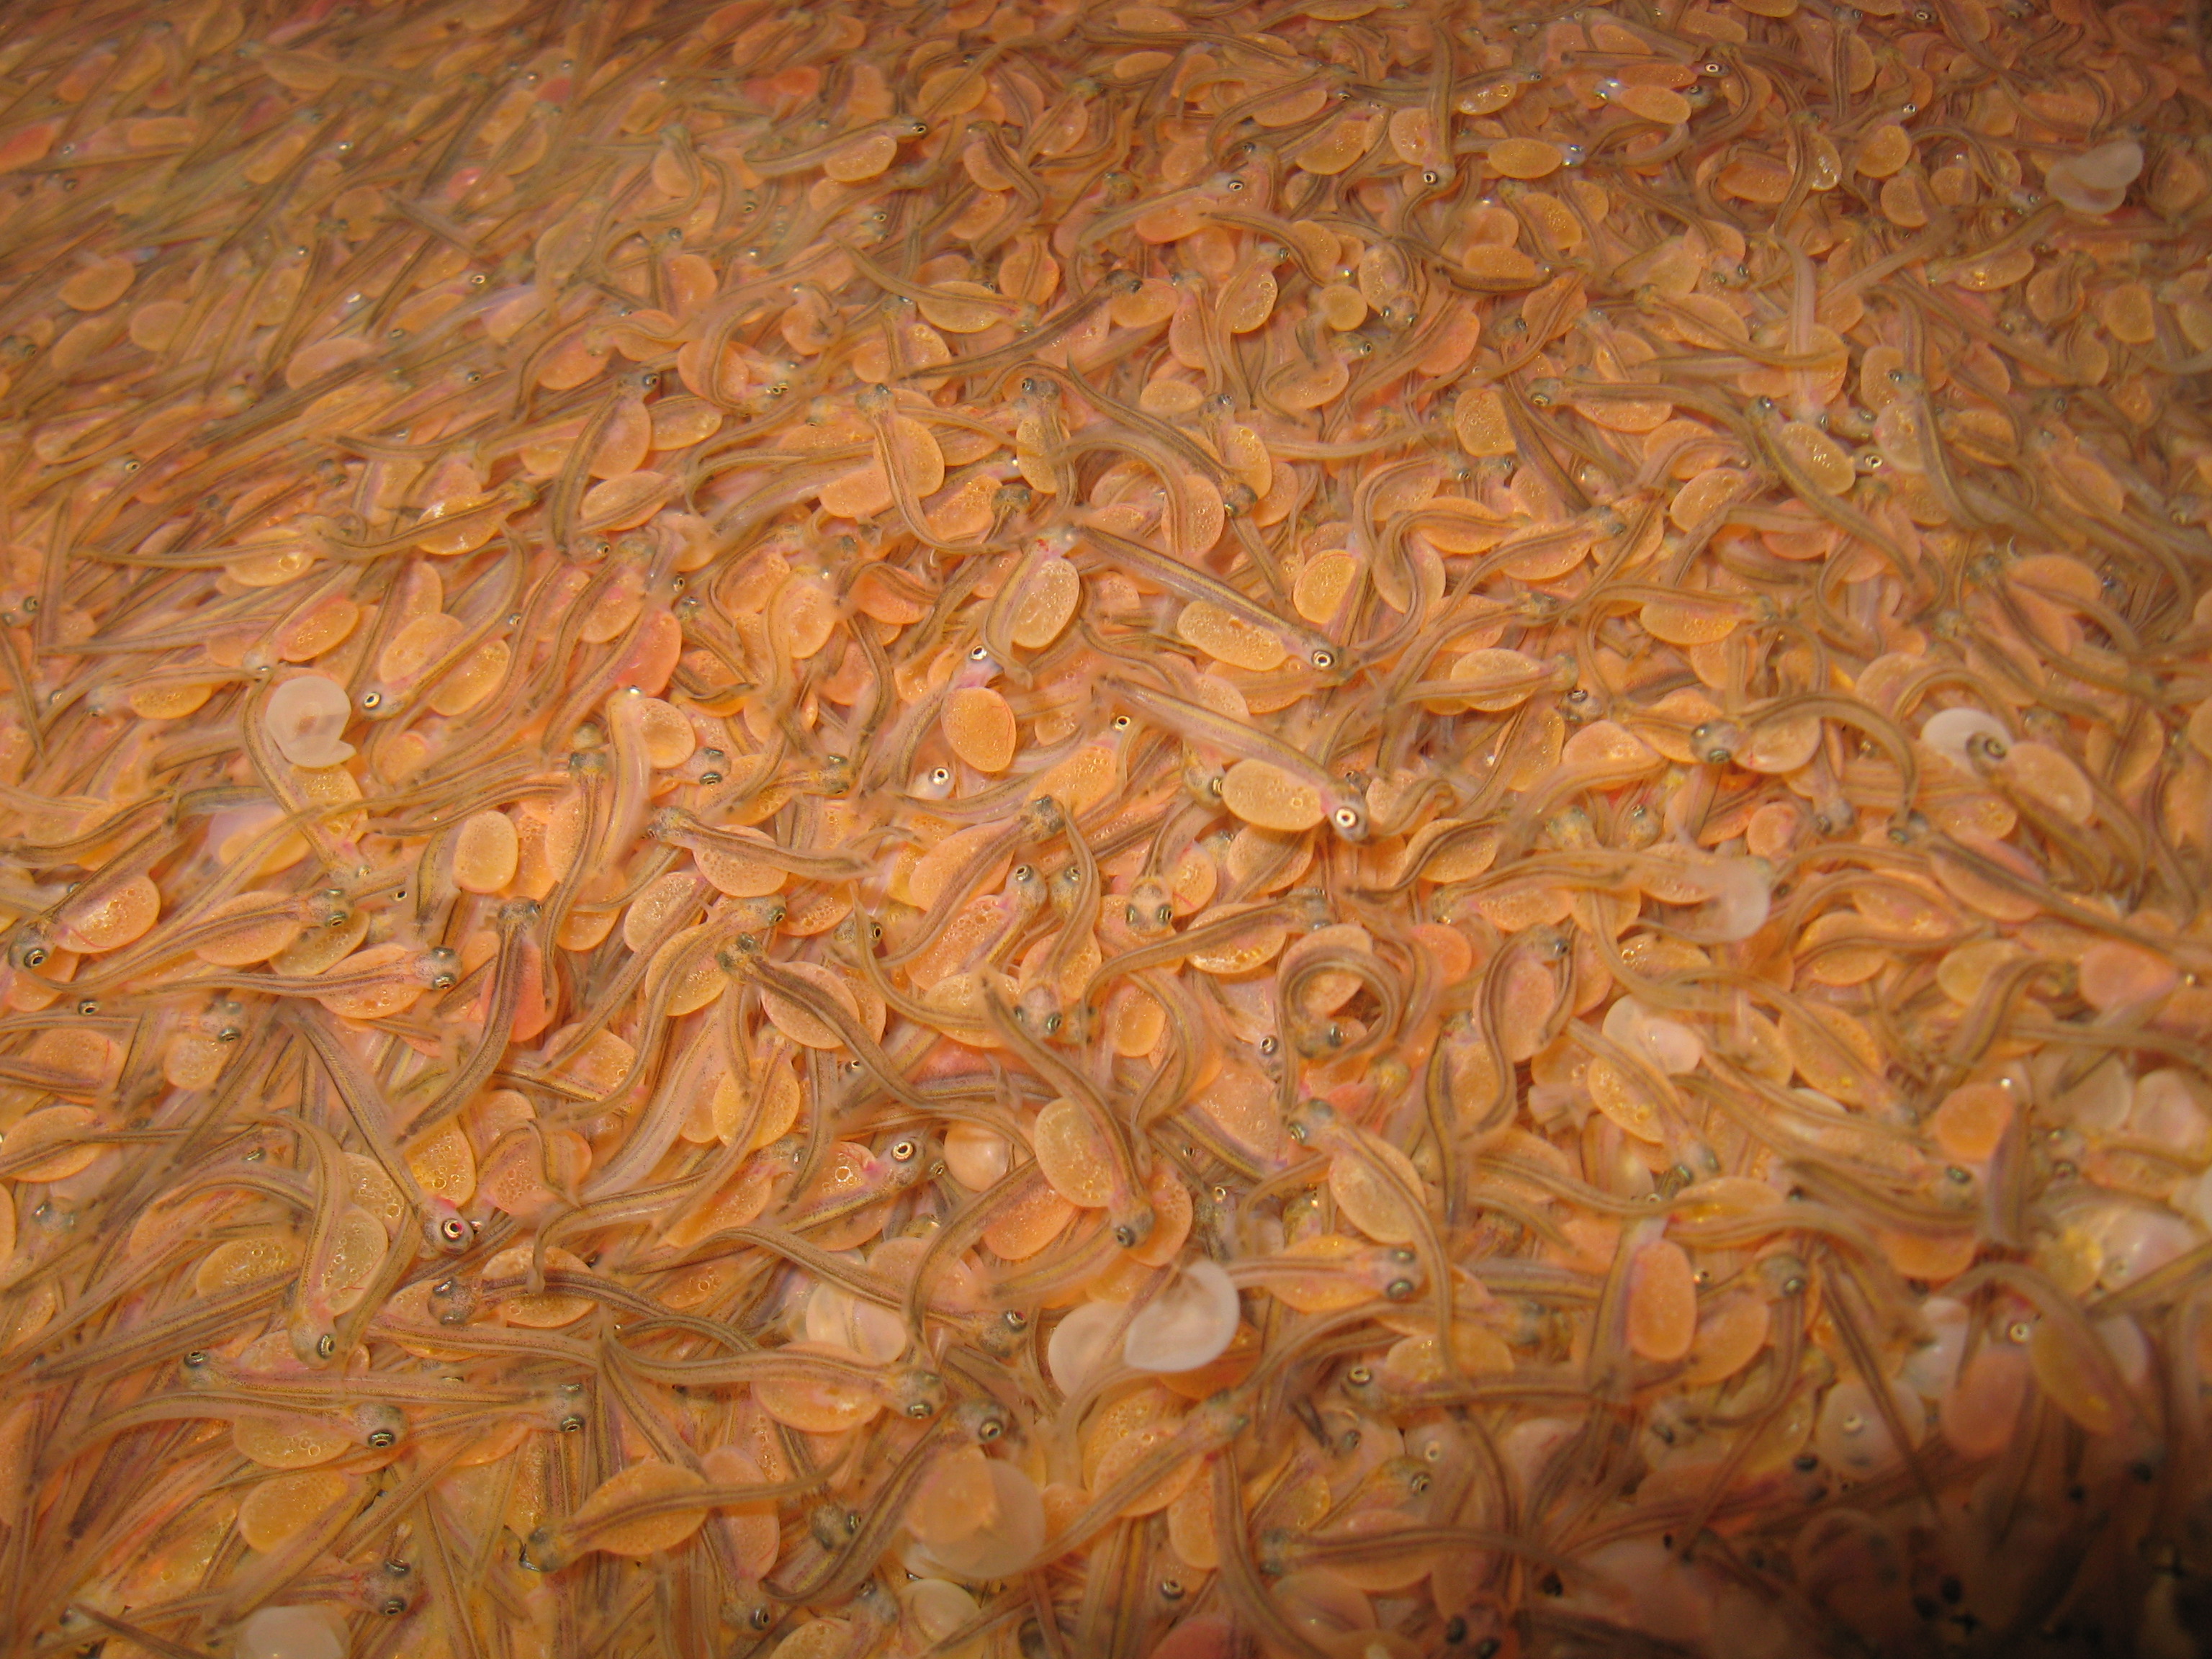 Hatched Lake Trout Eggs